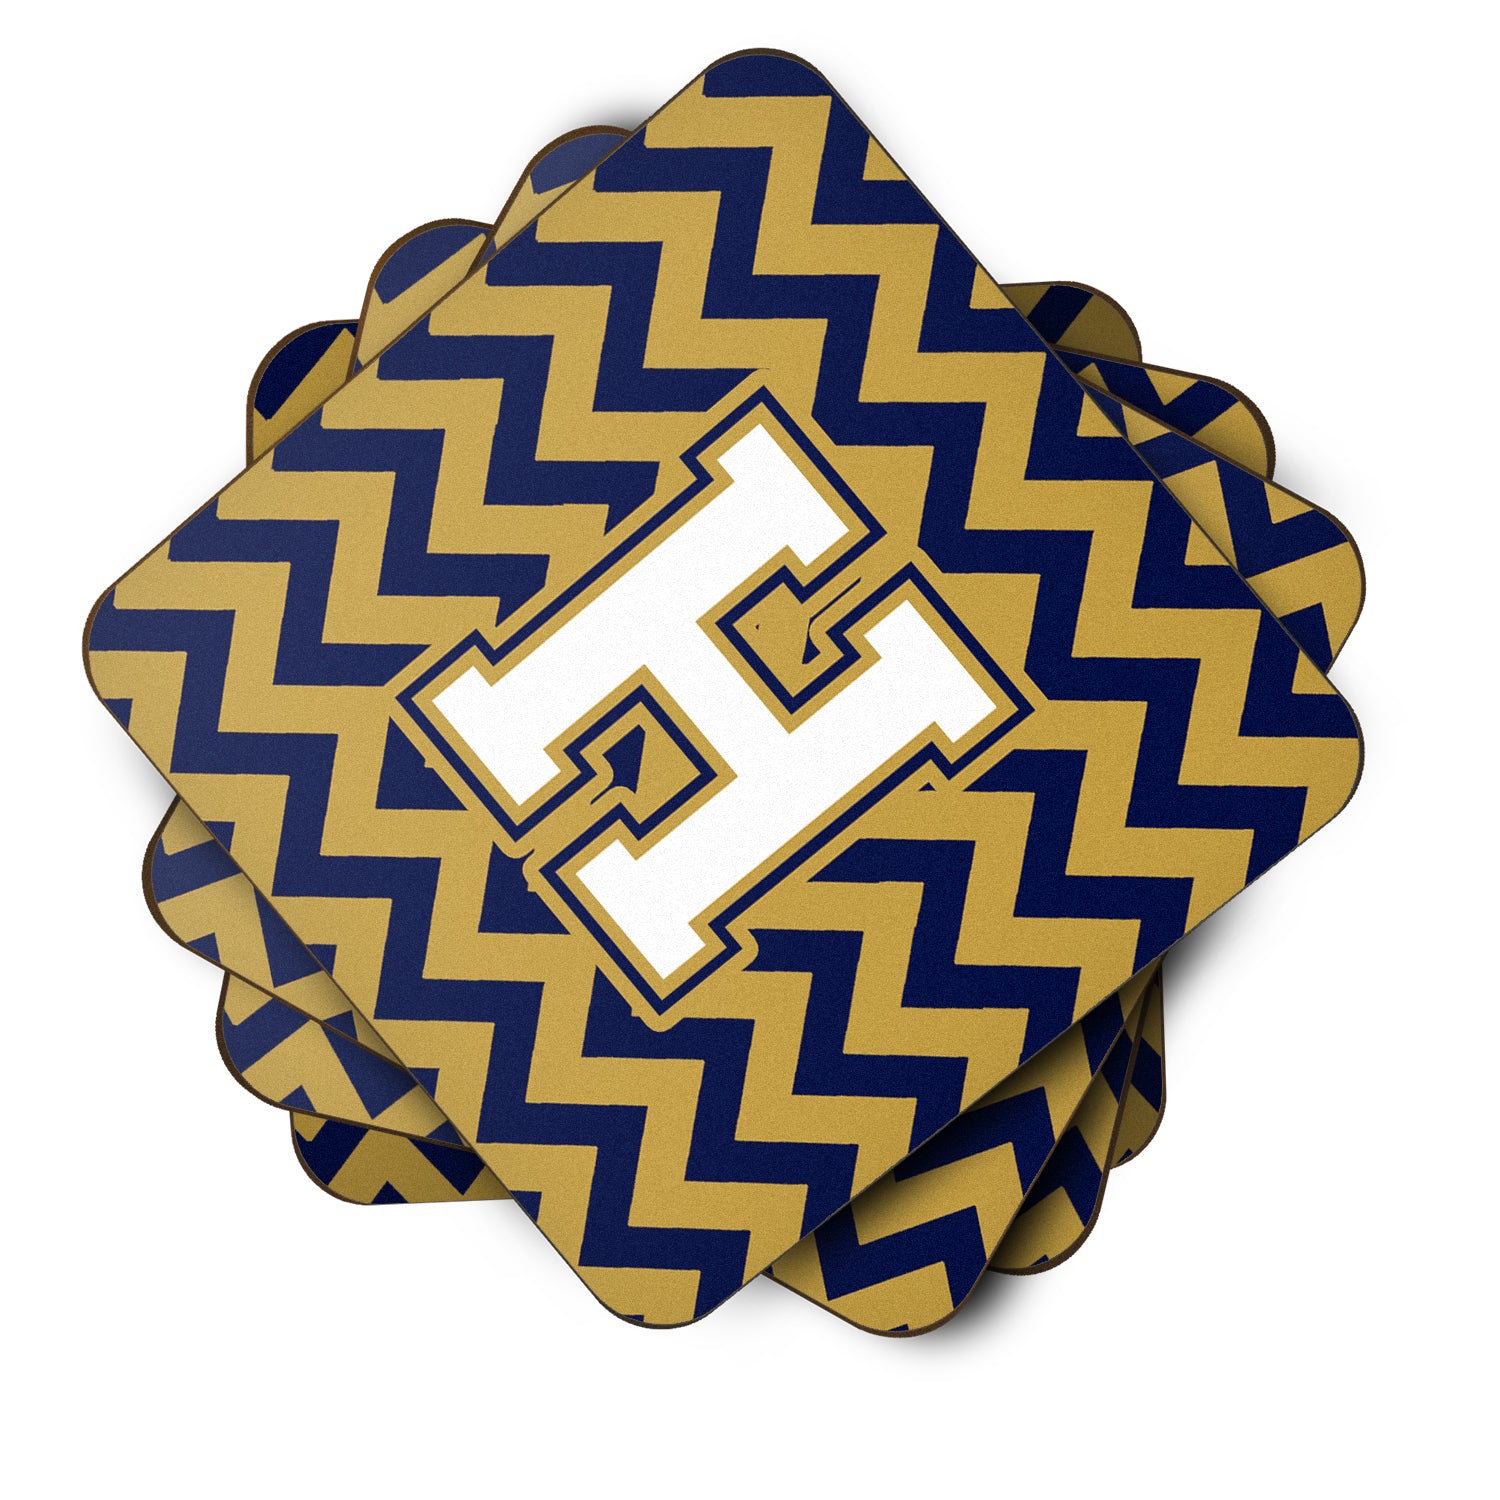 Letter H Chevron Navy Blue and Gold Foam Coaster Set of 4 CJ1057-HFC - the-store.com